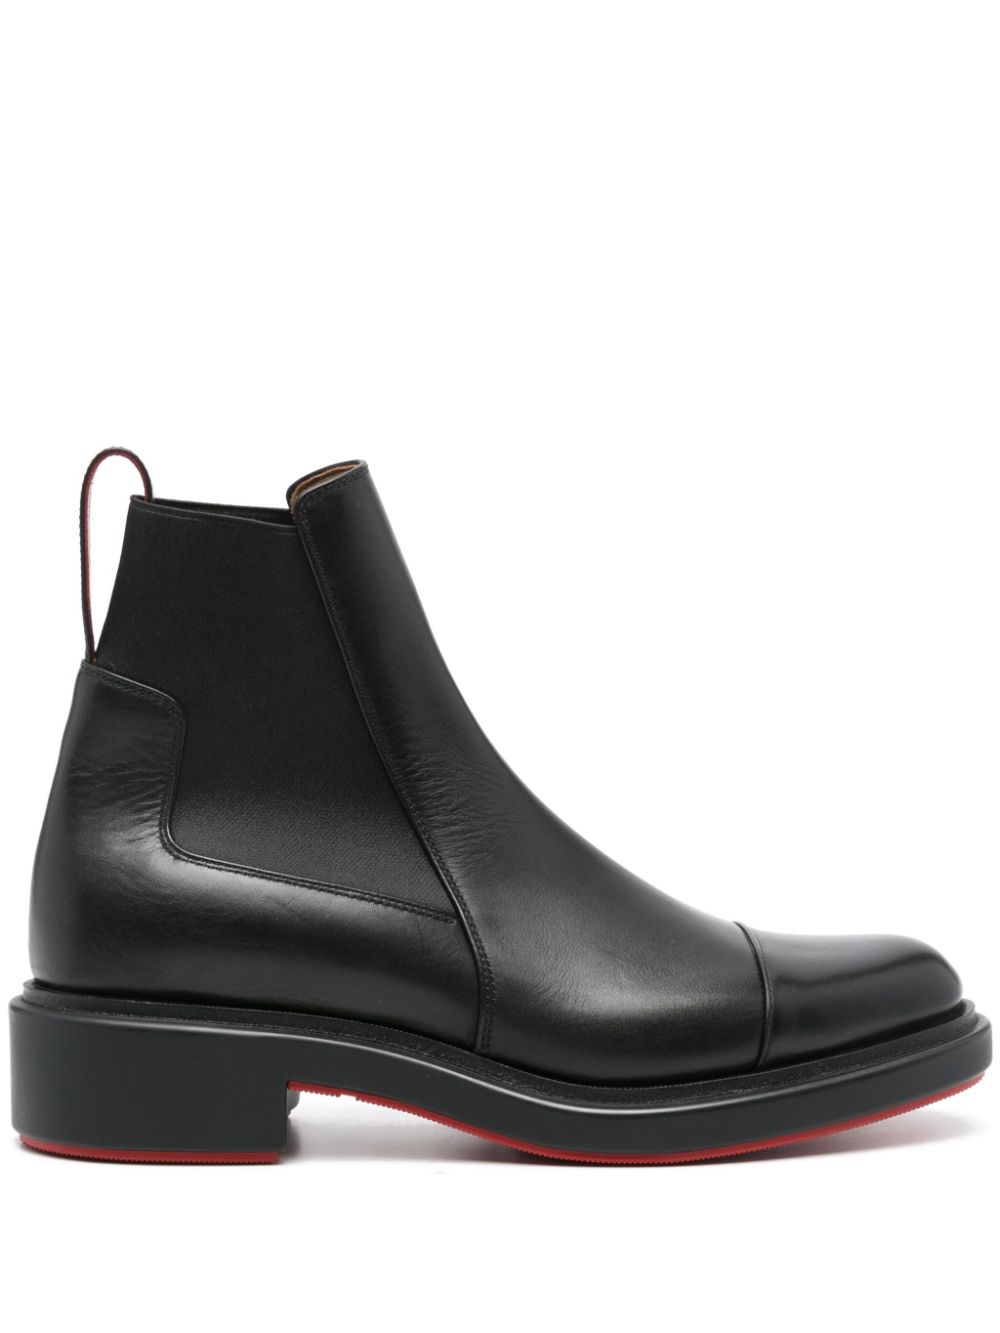 Christian Louboutin Panelled Design Round Toe Boots In Black